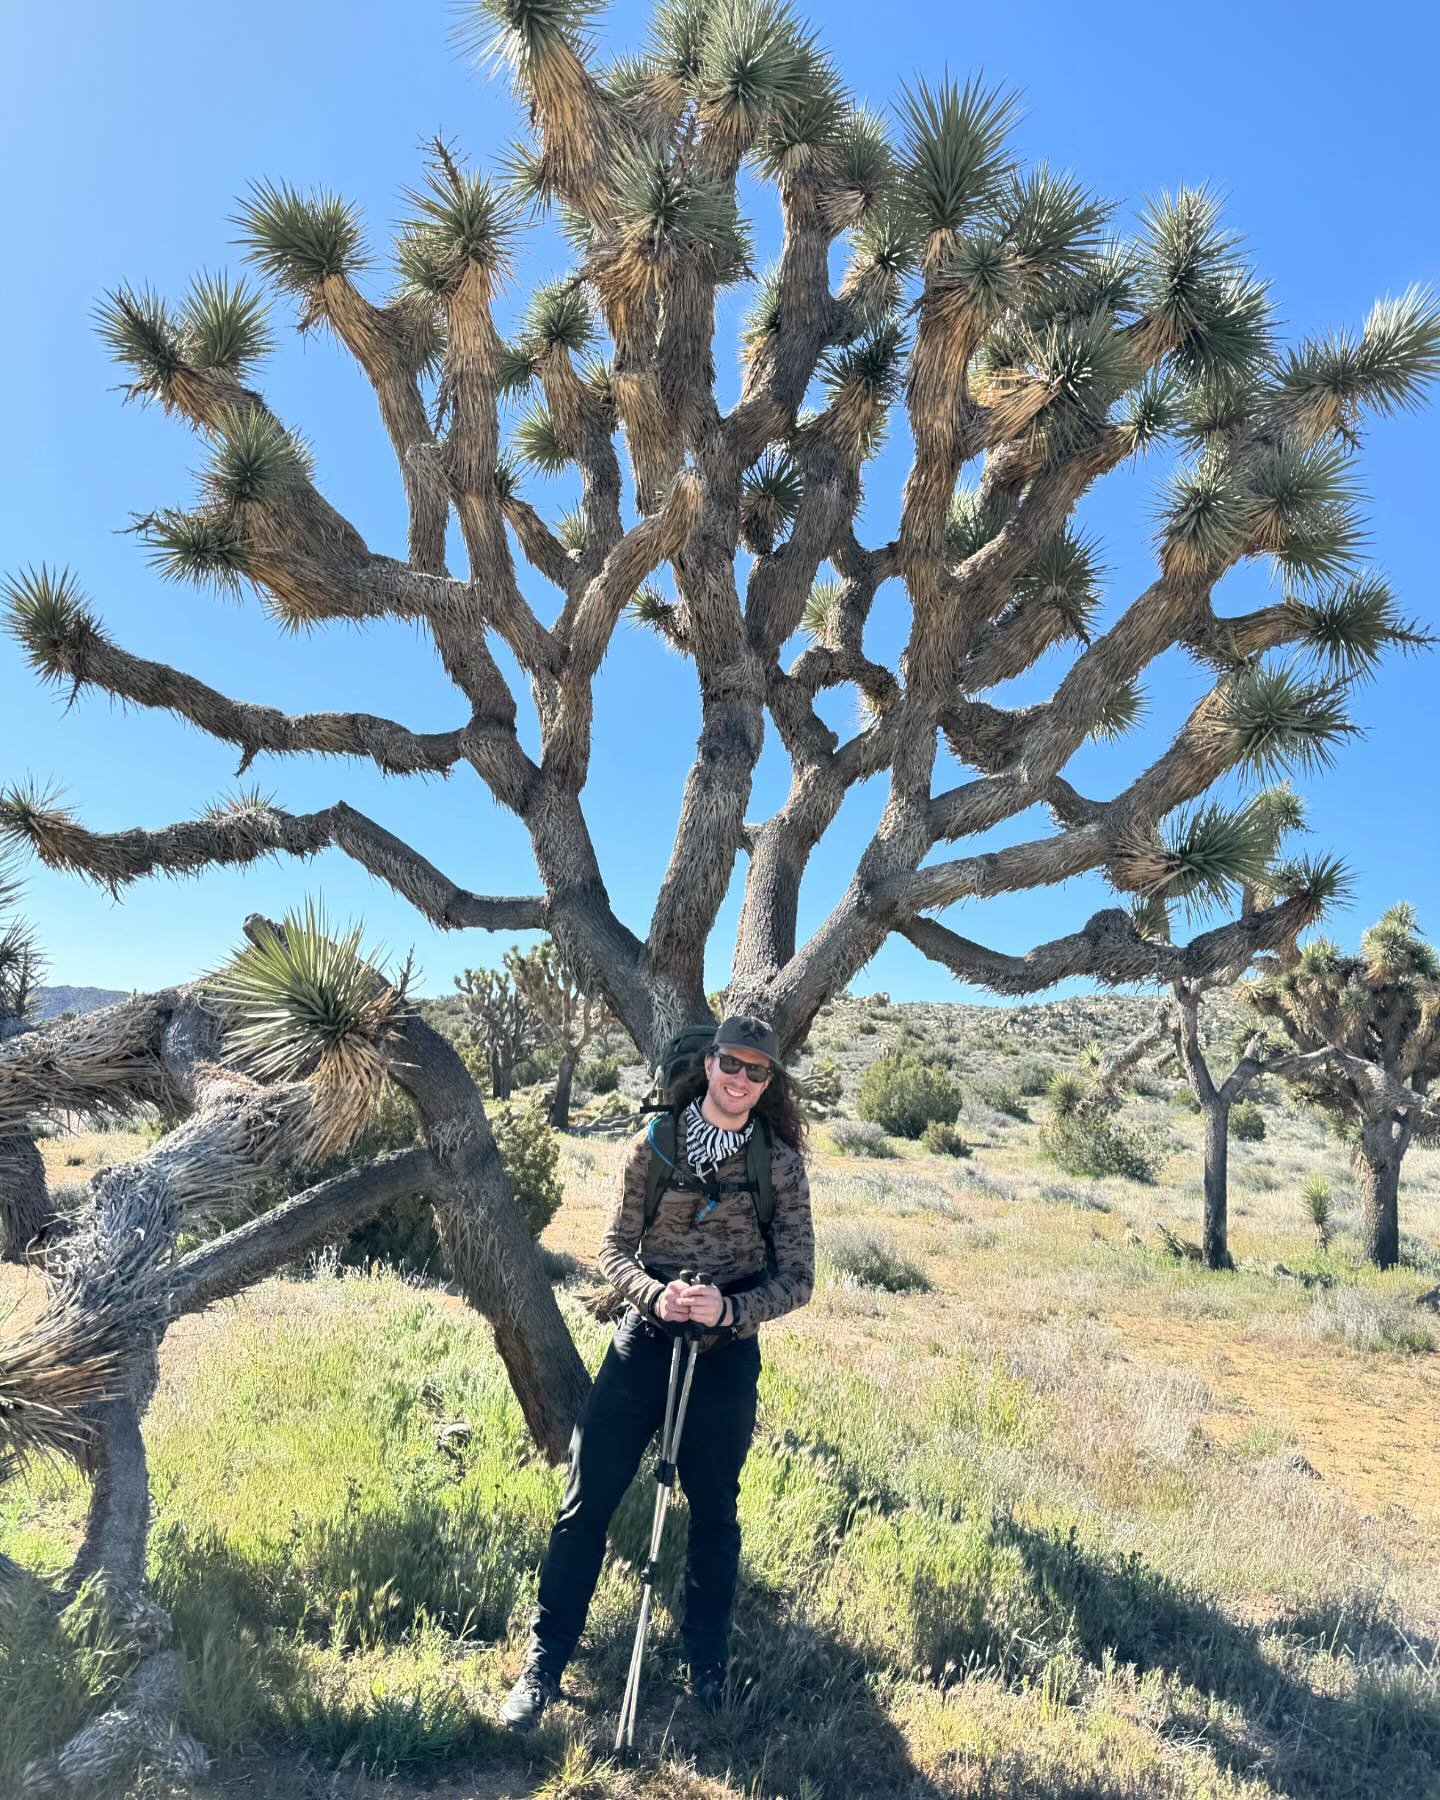 🏜️Joshua Tree was an eerie place full of strange alien  plant life and we had a grand ol' time exploring in the desert. @ghoul_zone @mattklisz 🌵Convinced that one of these grotesque things we encountered had to have been The Joshua Tree. It's aroun